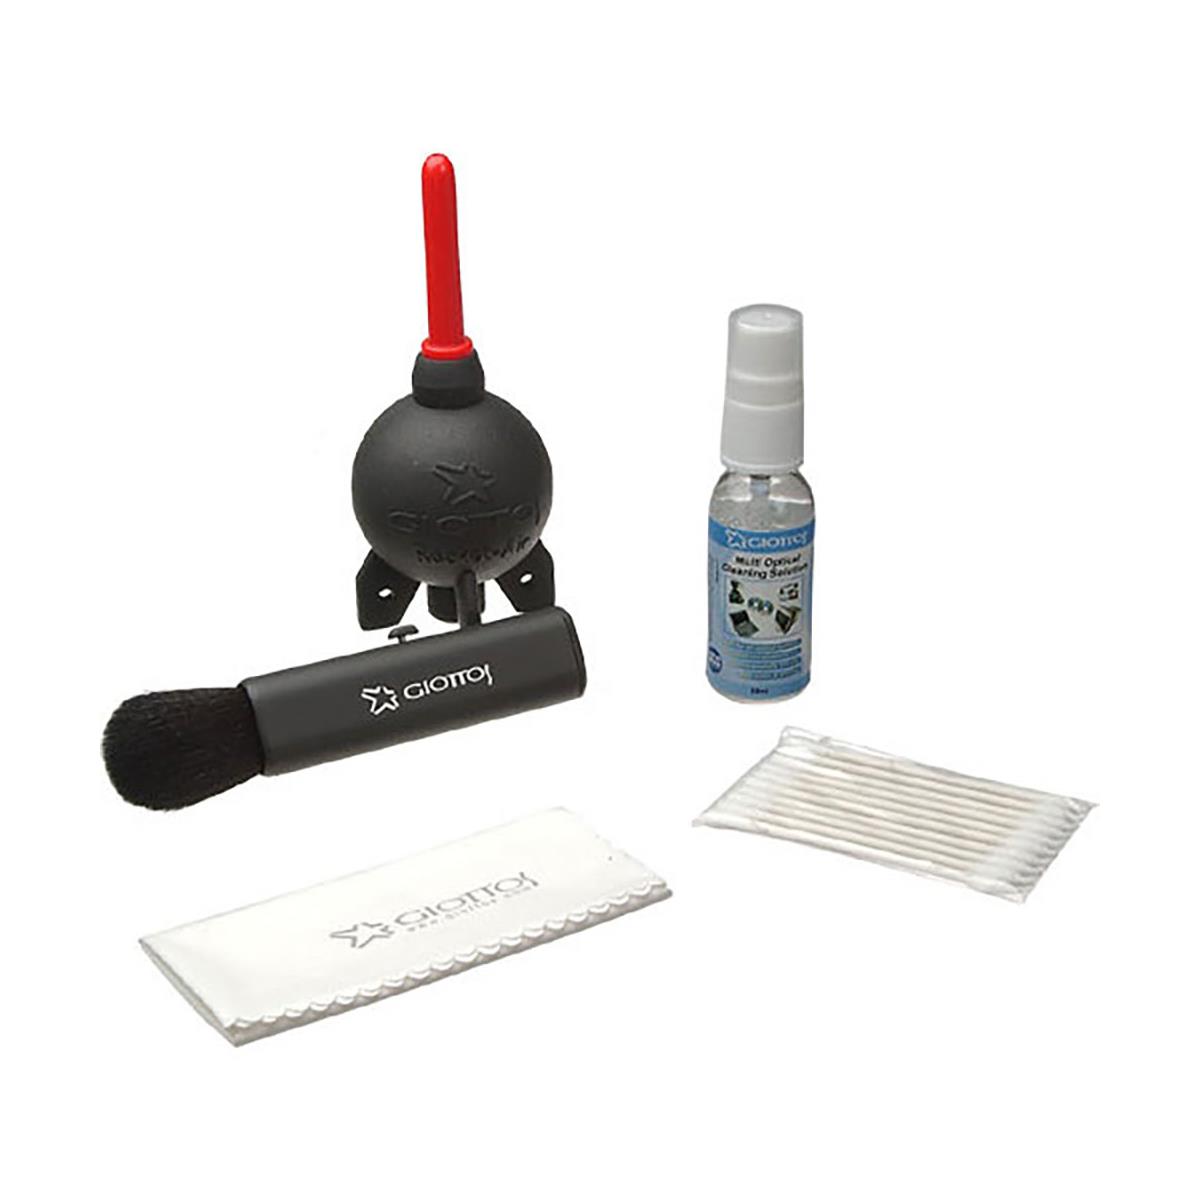 Image of Giottos OOptical Cleaning Bundle with Rocket Air Blaster